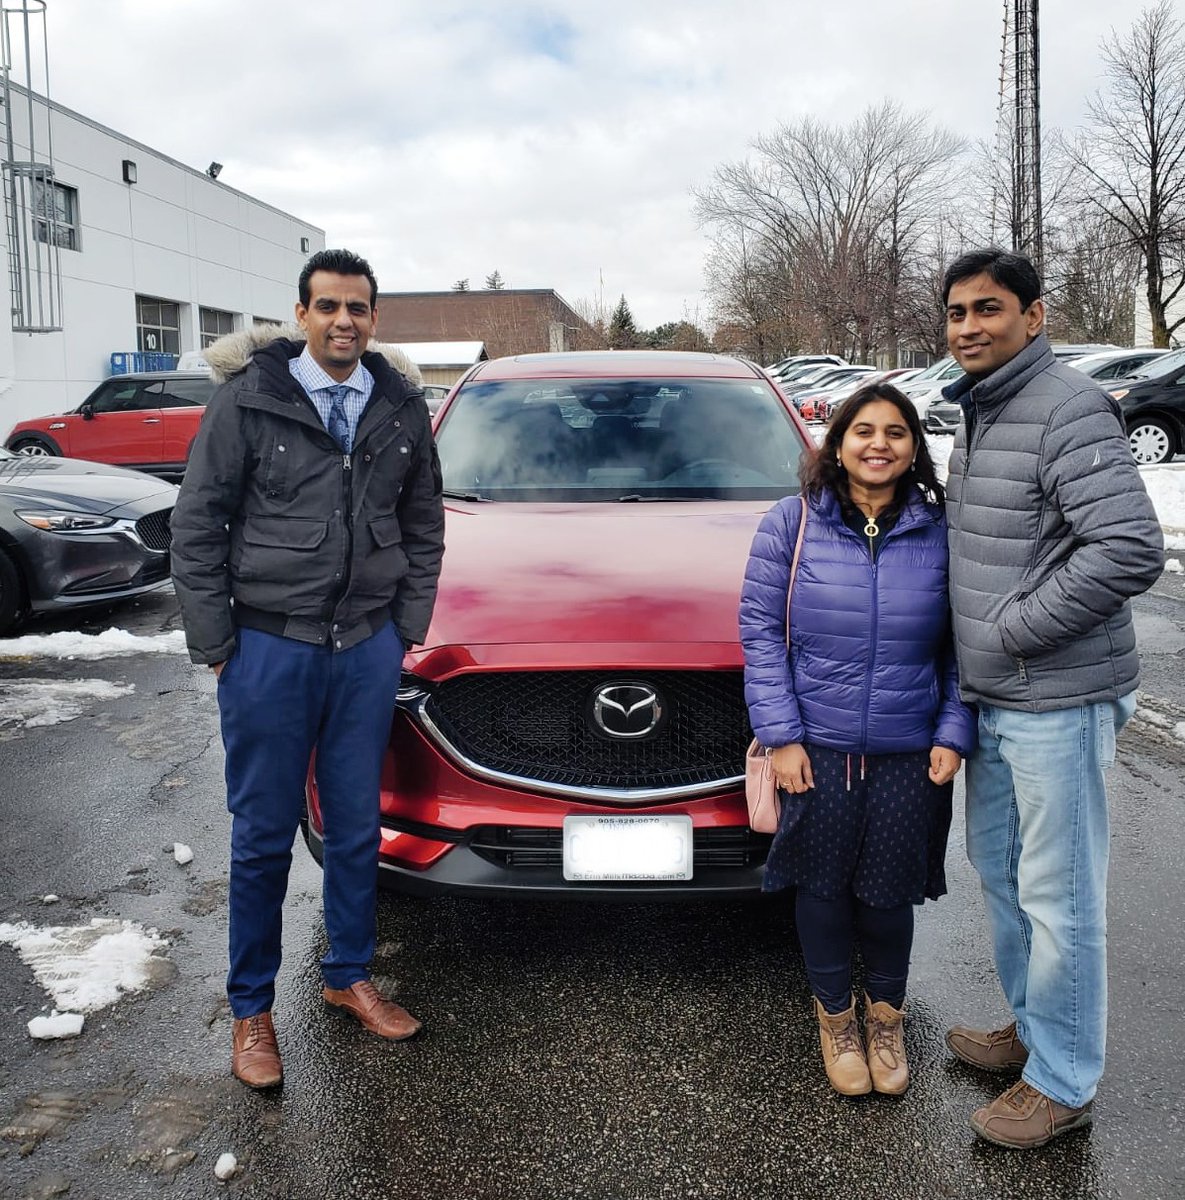 Congratulations and welcome to the Erin Mills Mazda family! 
.
.
.
.
.
.
#souldredcrystalmetallic
#emmfam #mazda3 #cx5 #miata #drivingpassion #kodosoulofmotion #fuelefficiency #cargram #newcardiscounts #2019carsale #yearend #mazdayearend #m3 #dealersinmississauga